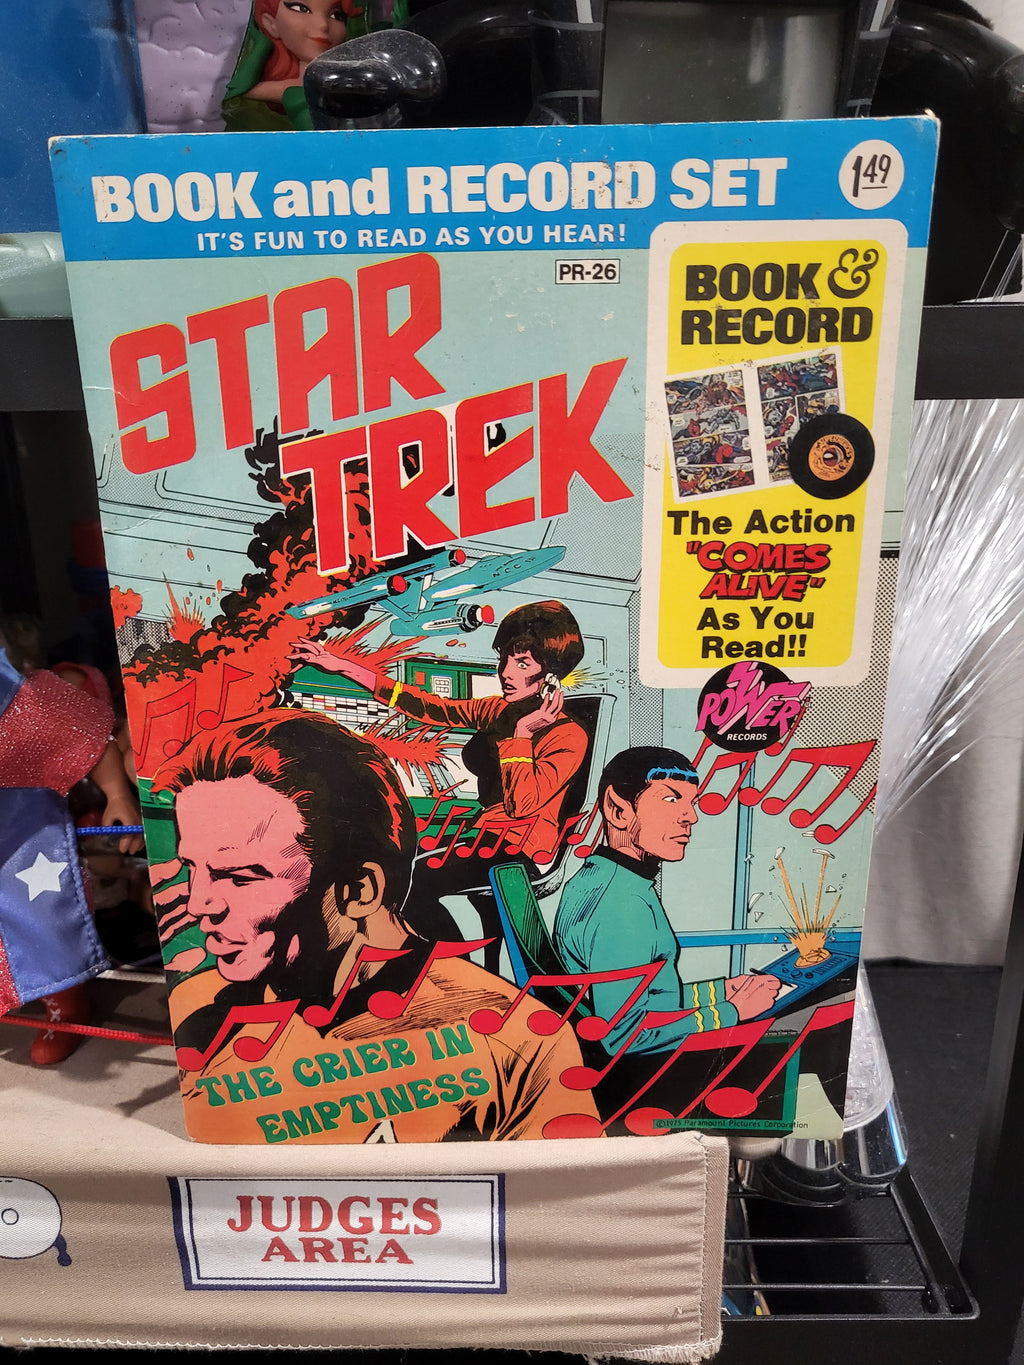 Star Trek: The Crier In Emptiness (1975) Book and Record Set PR-26 Power Records